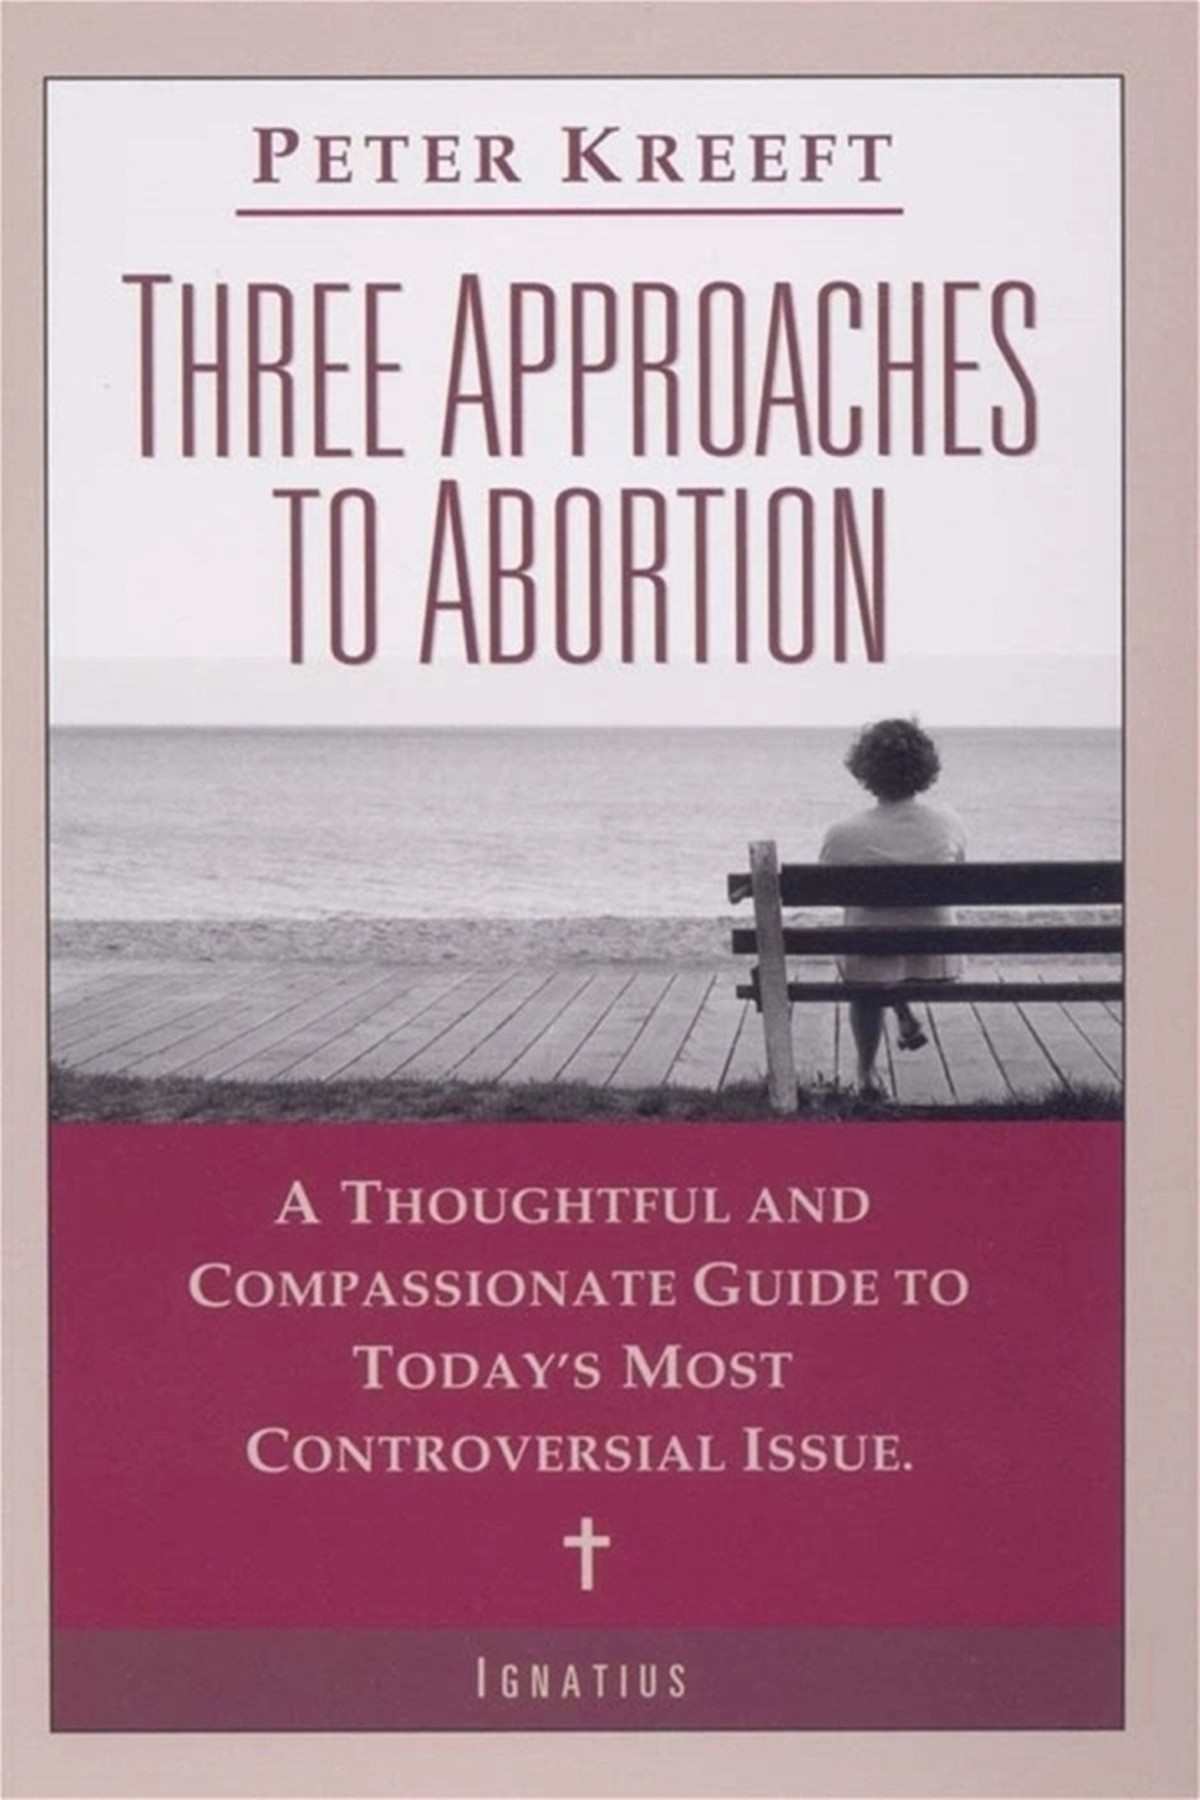 1. Three Approaches to Abortion by Peter Kreeft